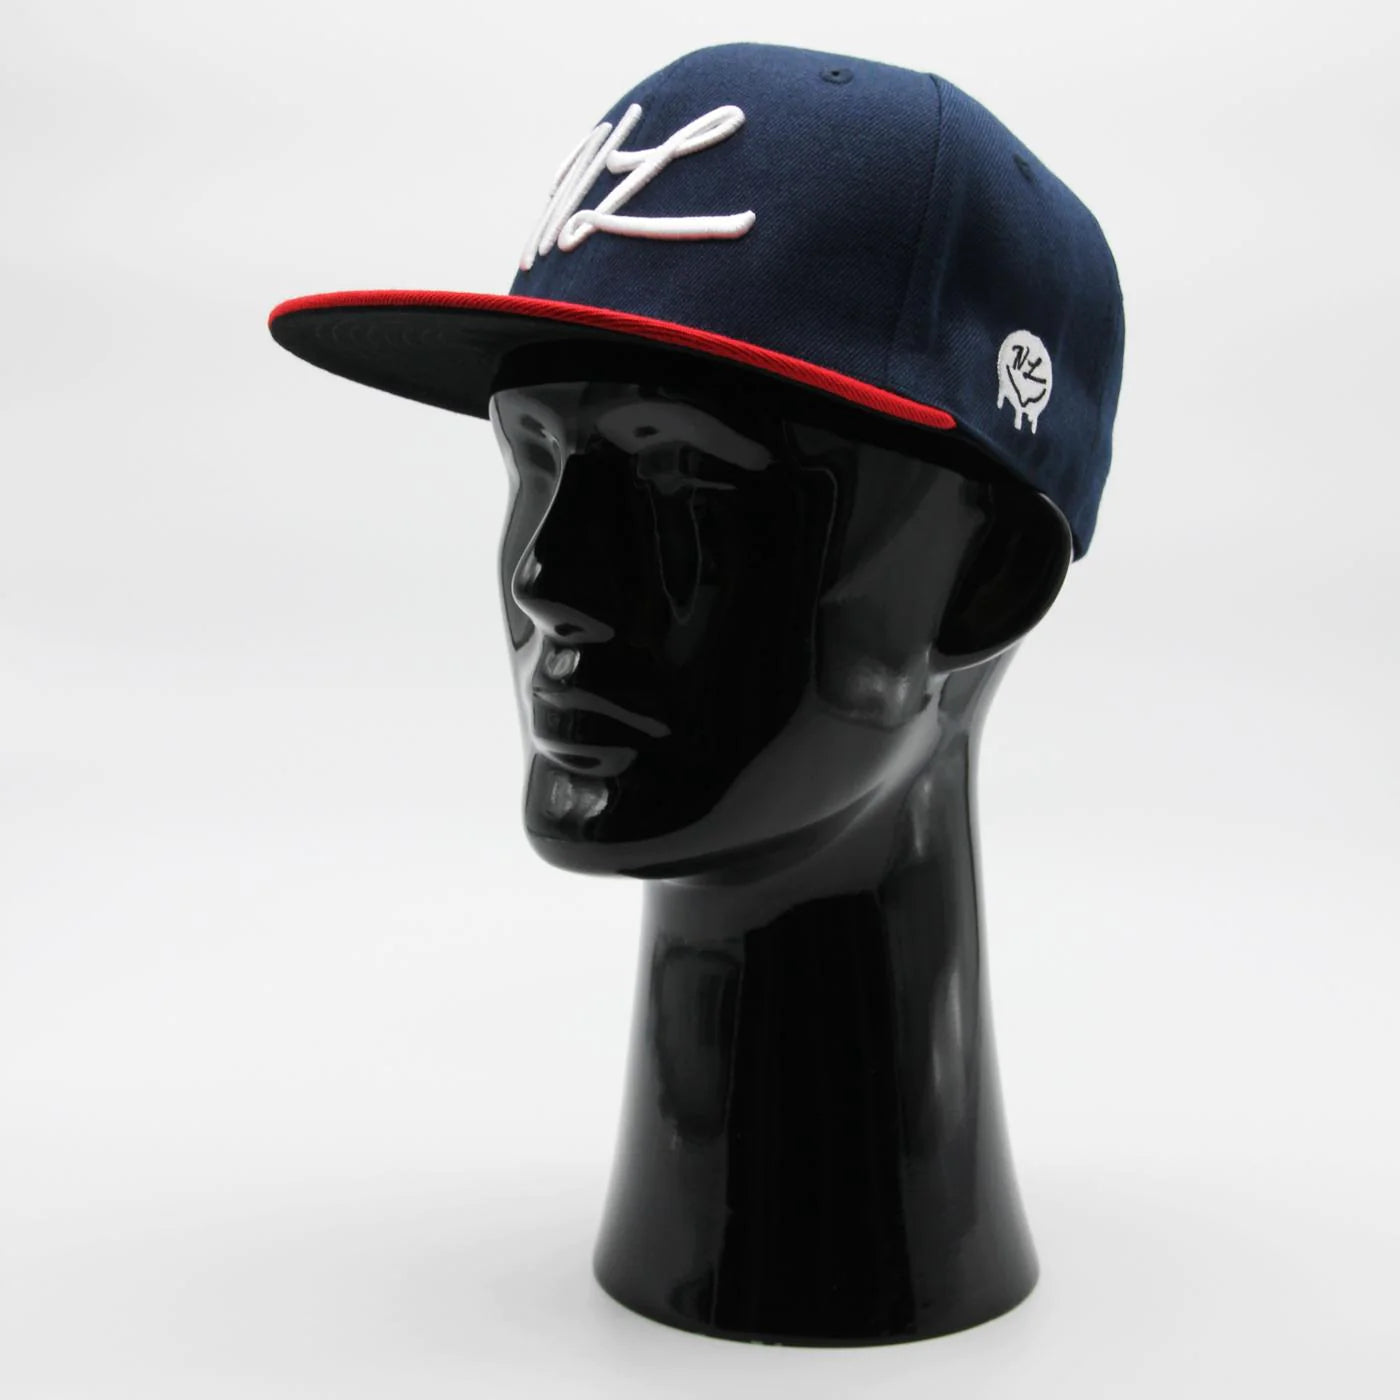 Icon Basic Fitted Navy/Red/White